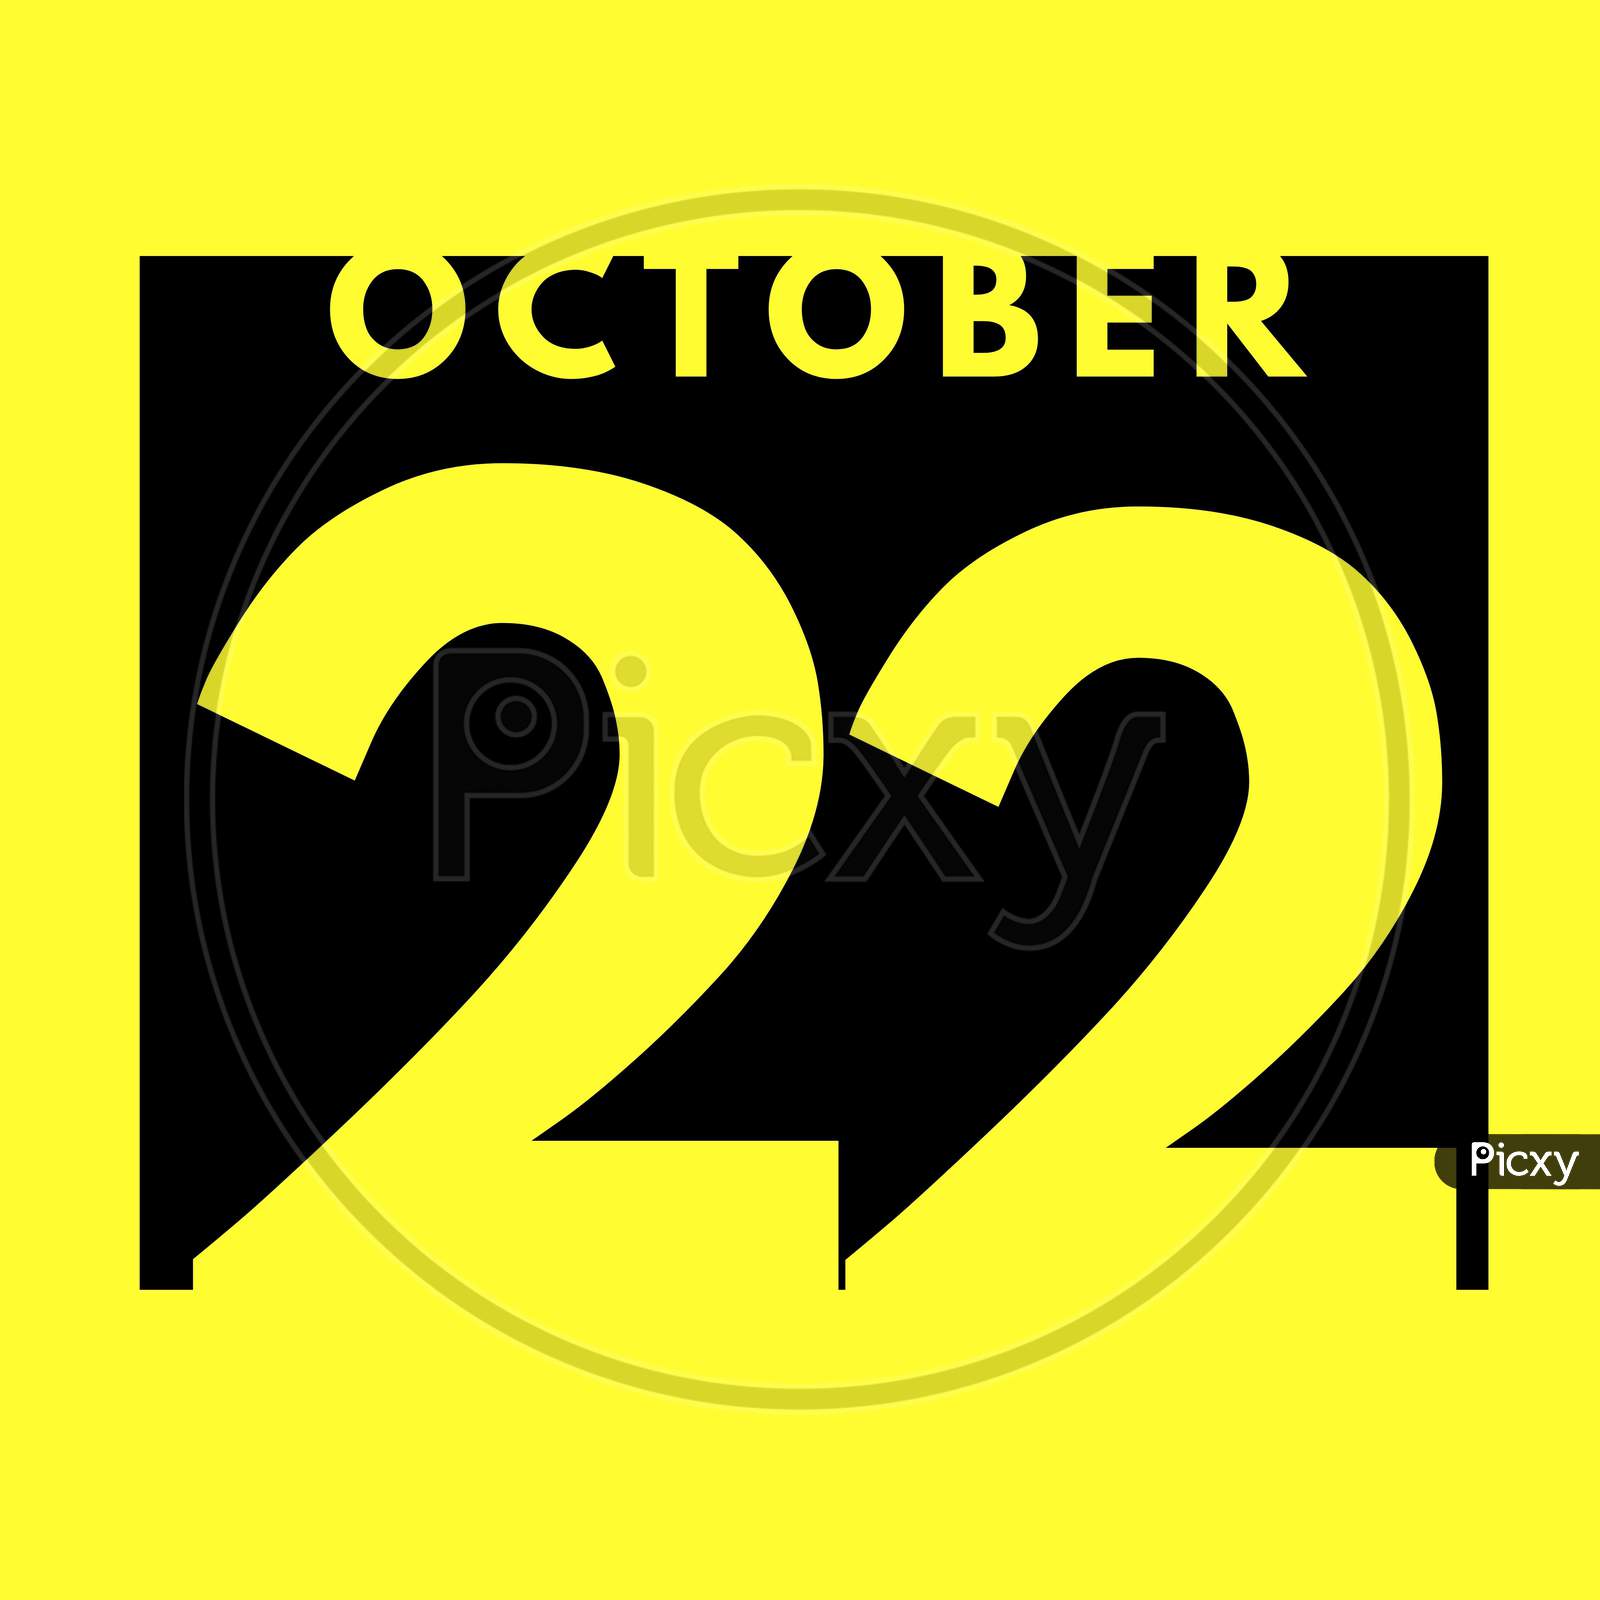 October 22 . Flat Modern Daily Calendar Icon .Date ,Day, Month .Calendar For The Month Of October